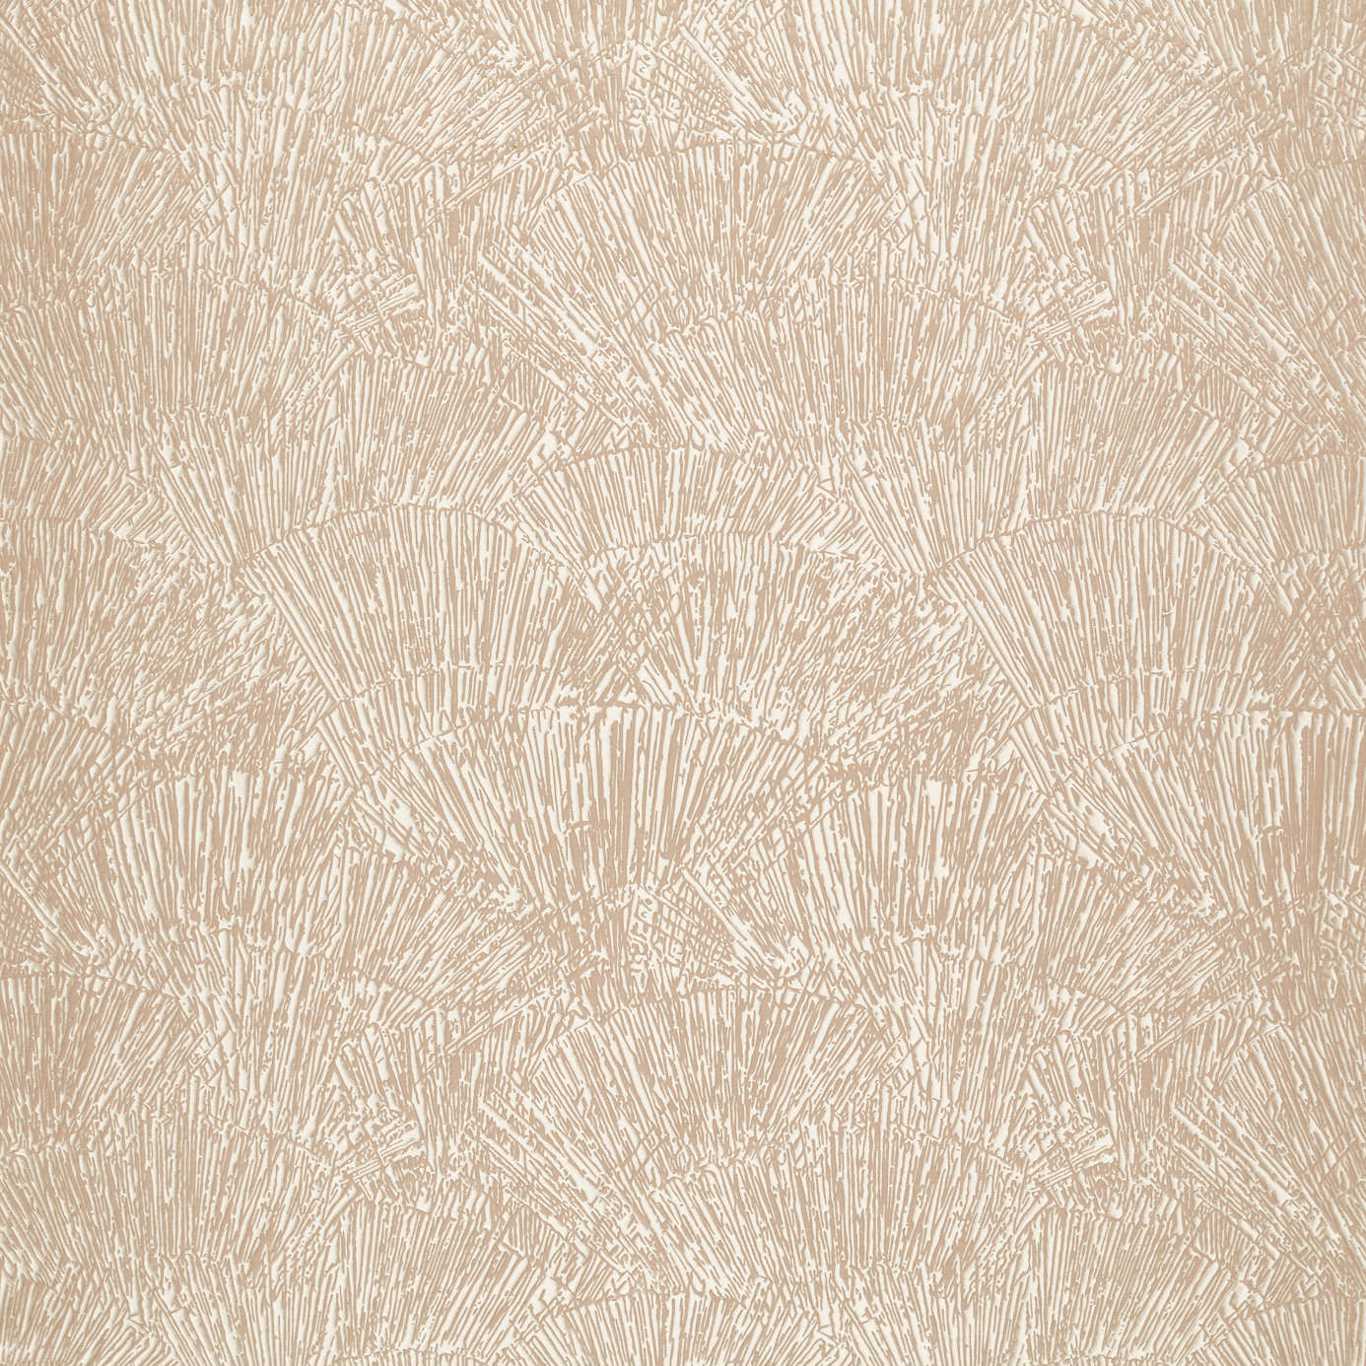 Tessen Parchment Fabric by HAR